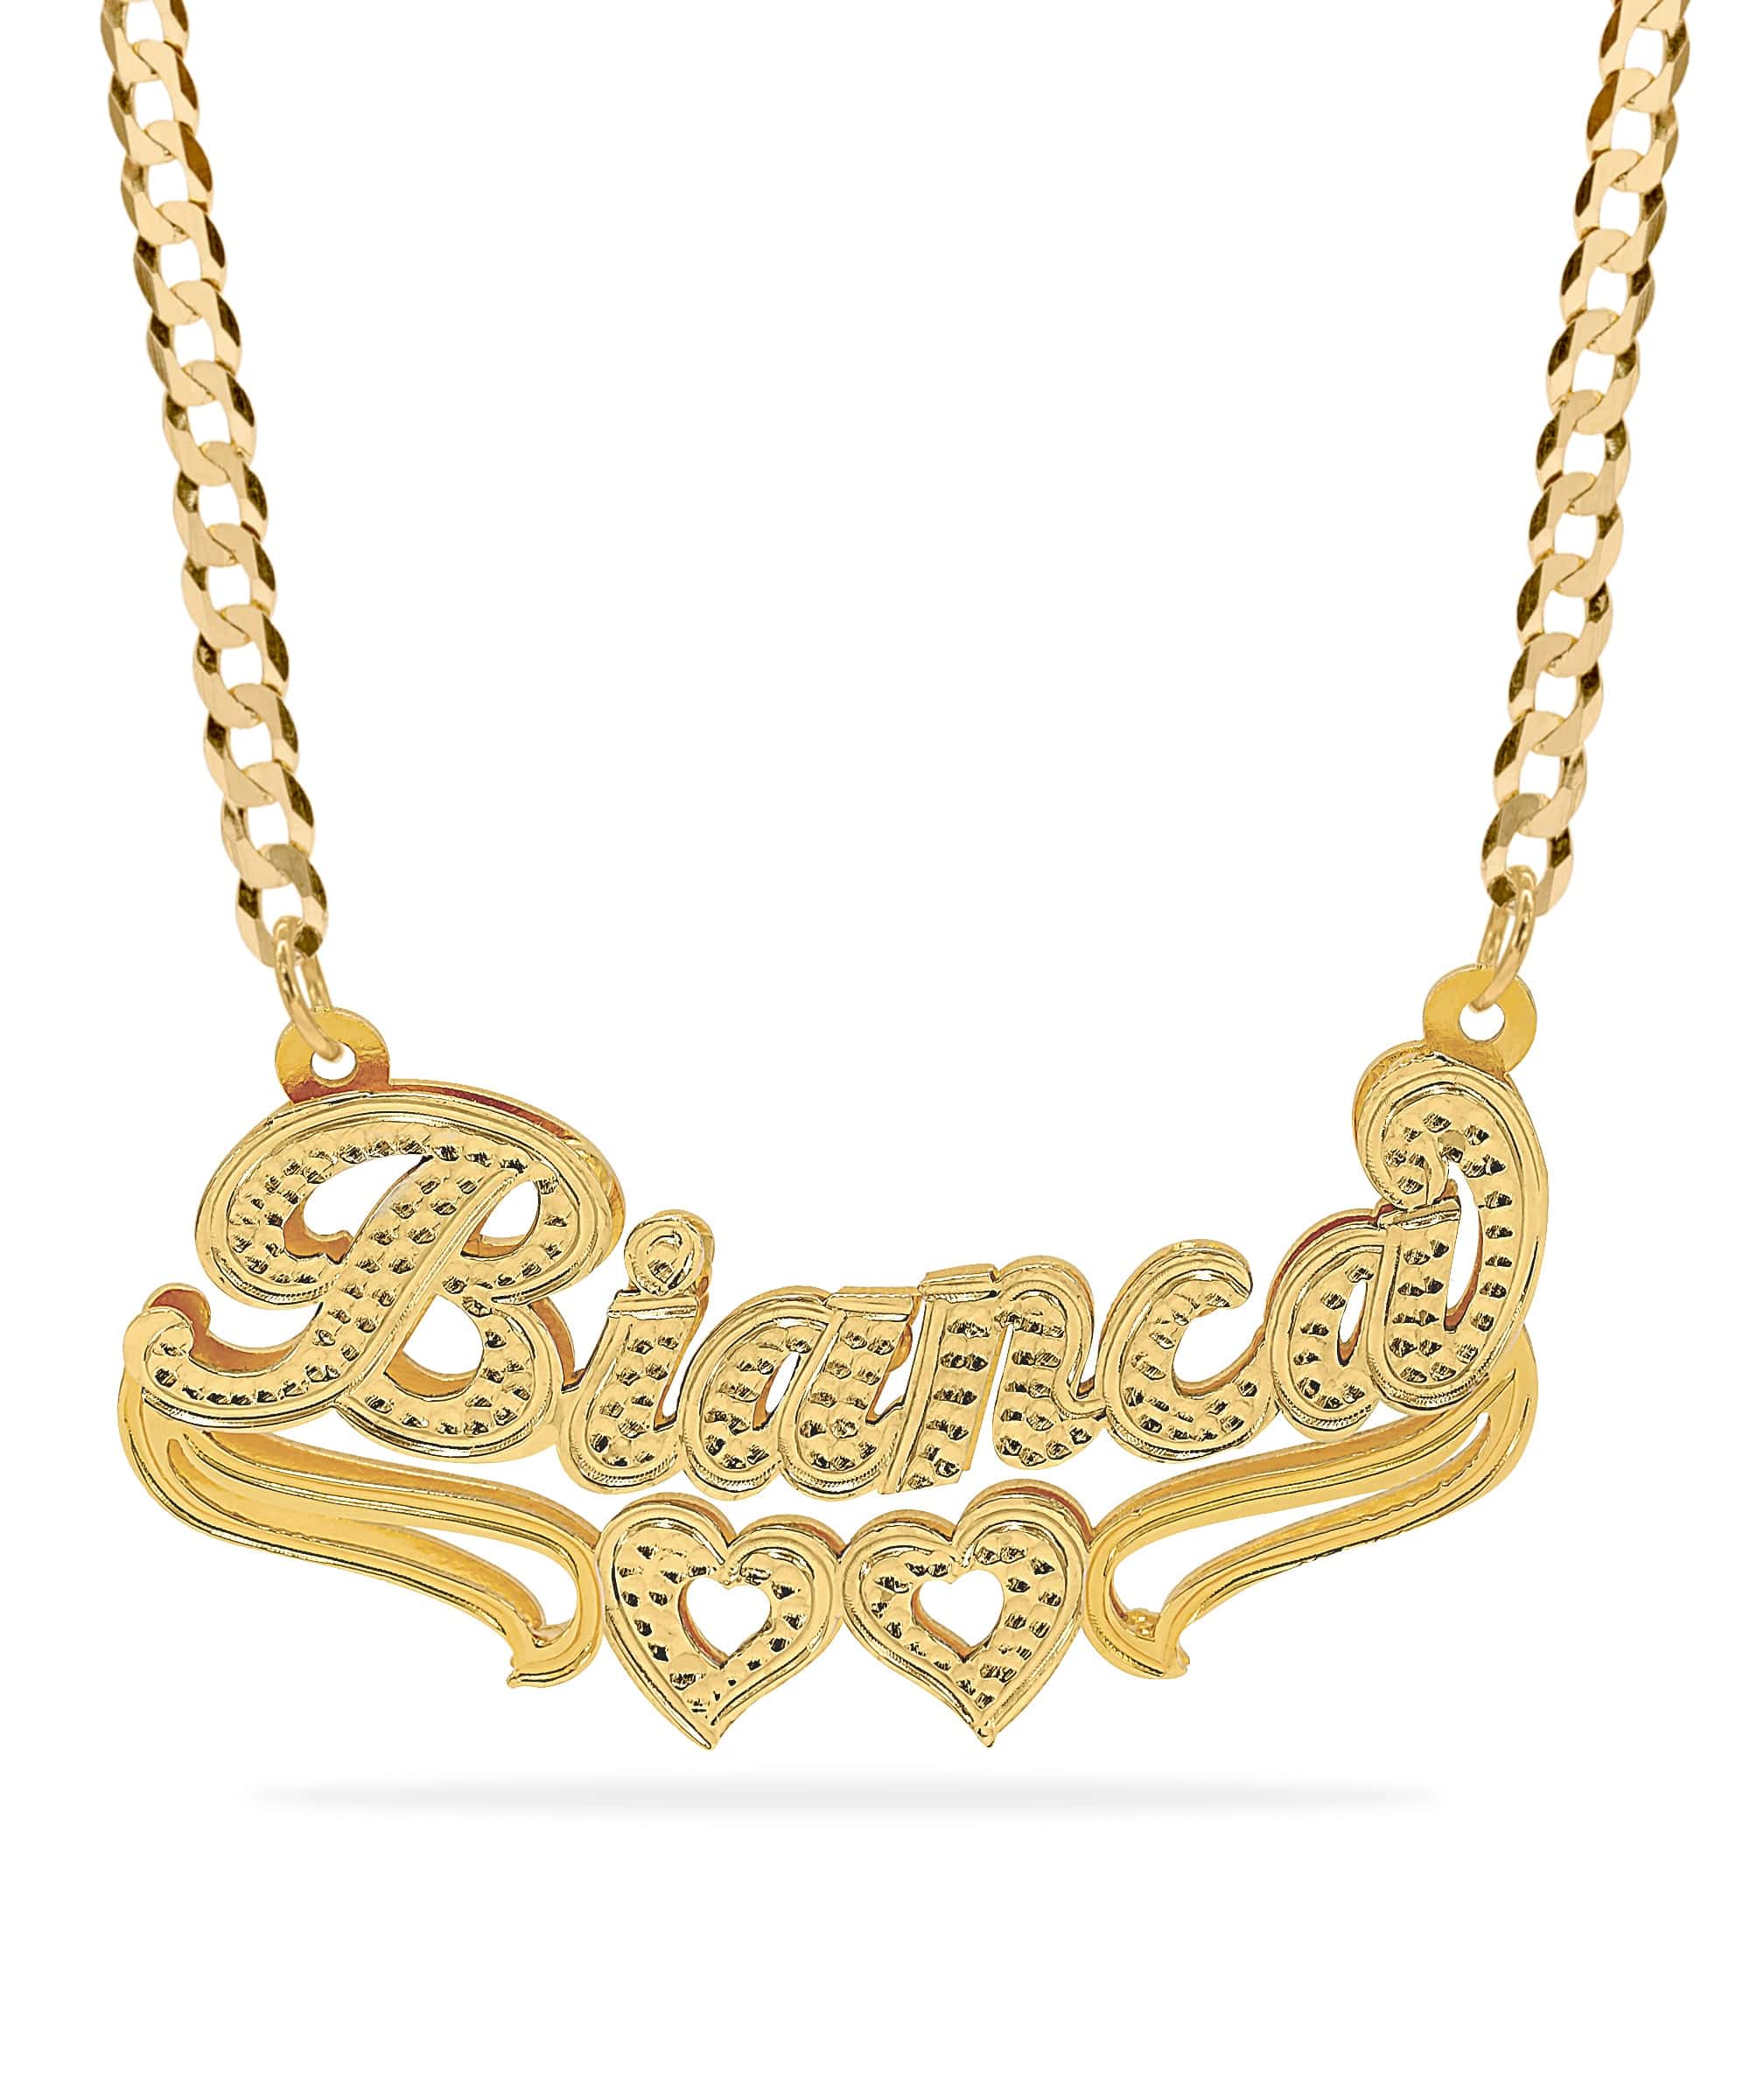 The Golden Double Plated Heart Name Necklace with Cuban Chain